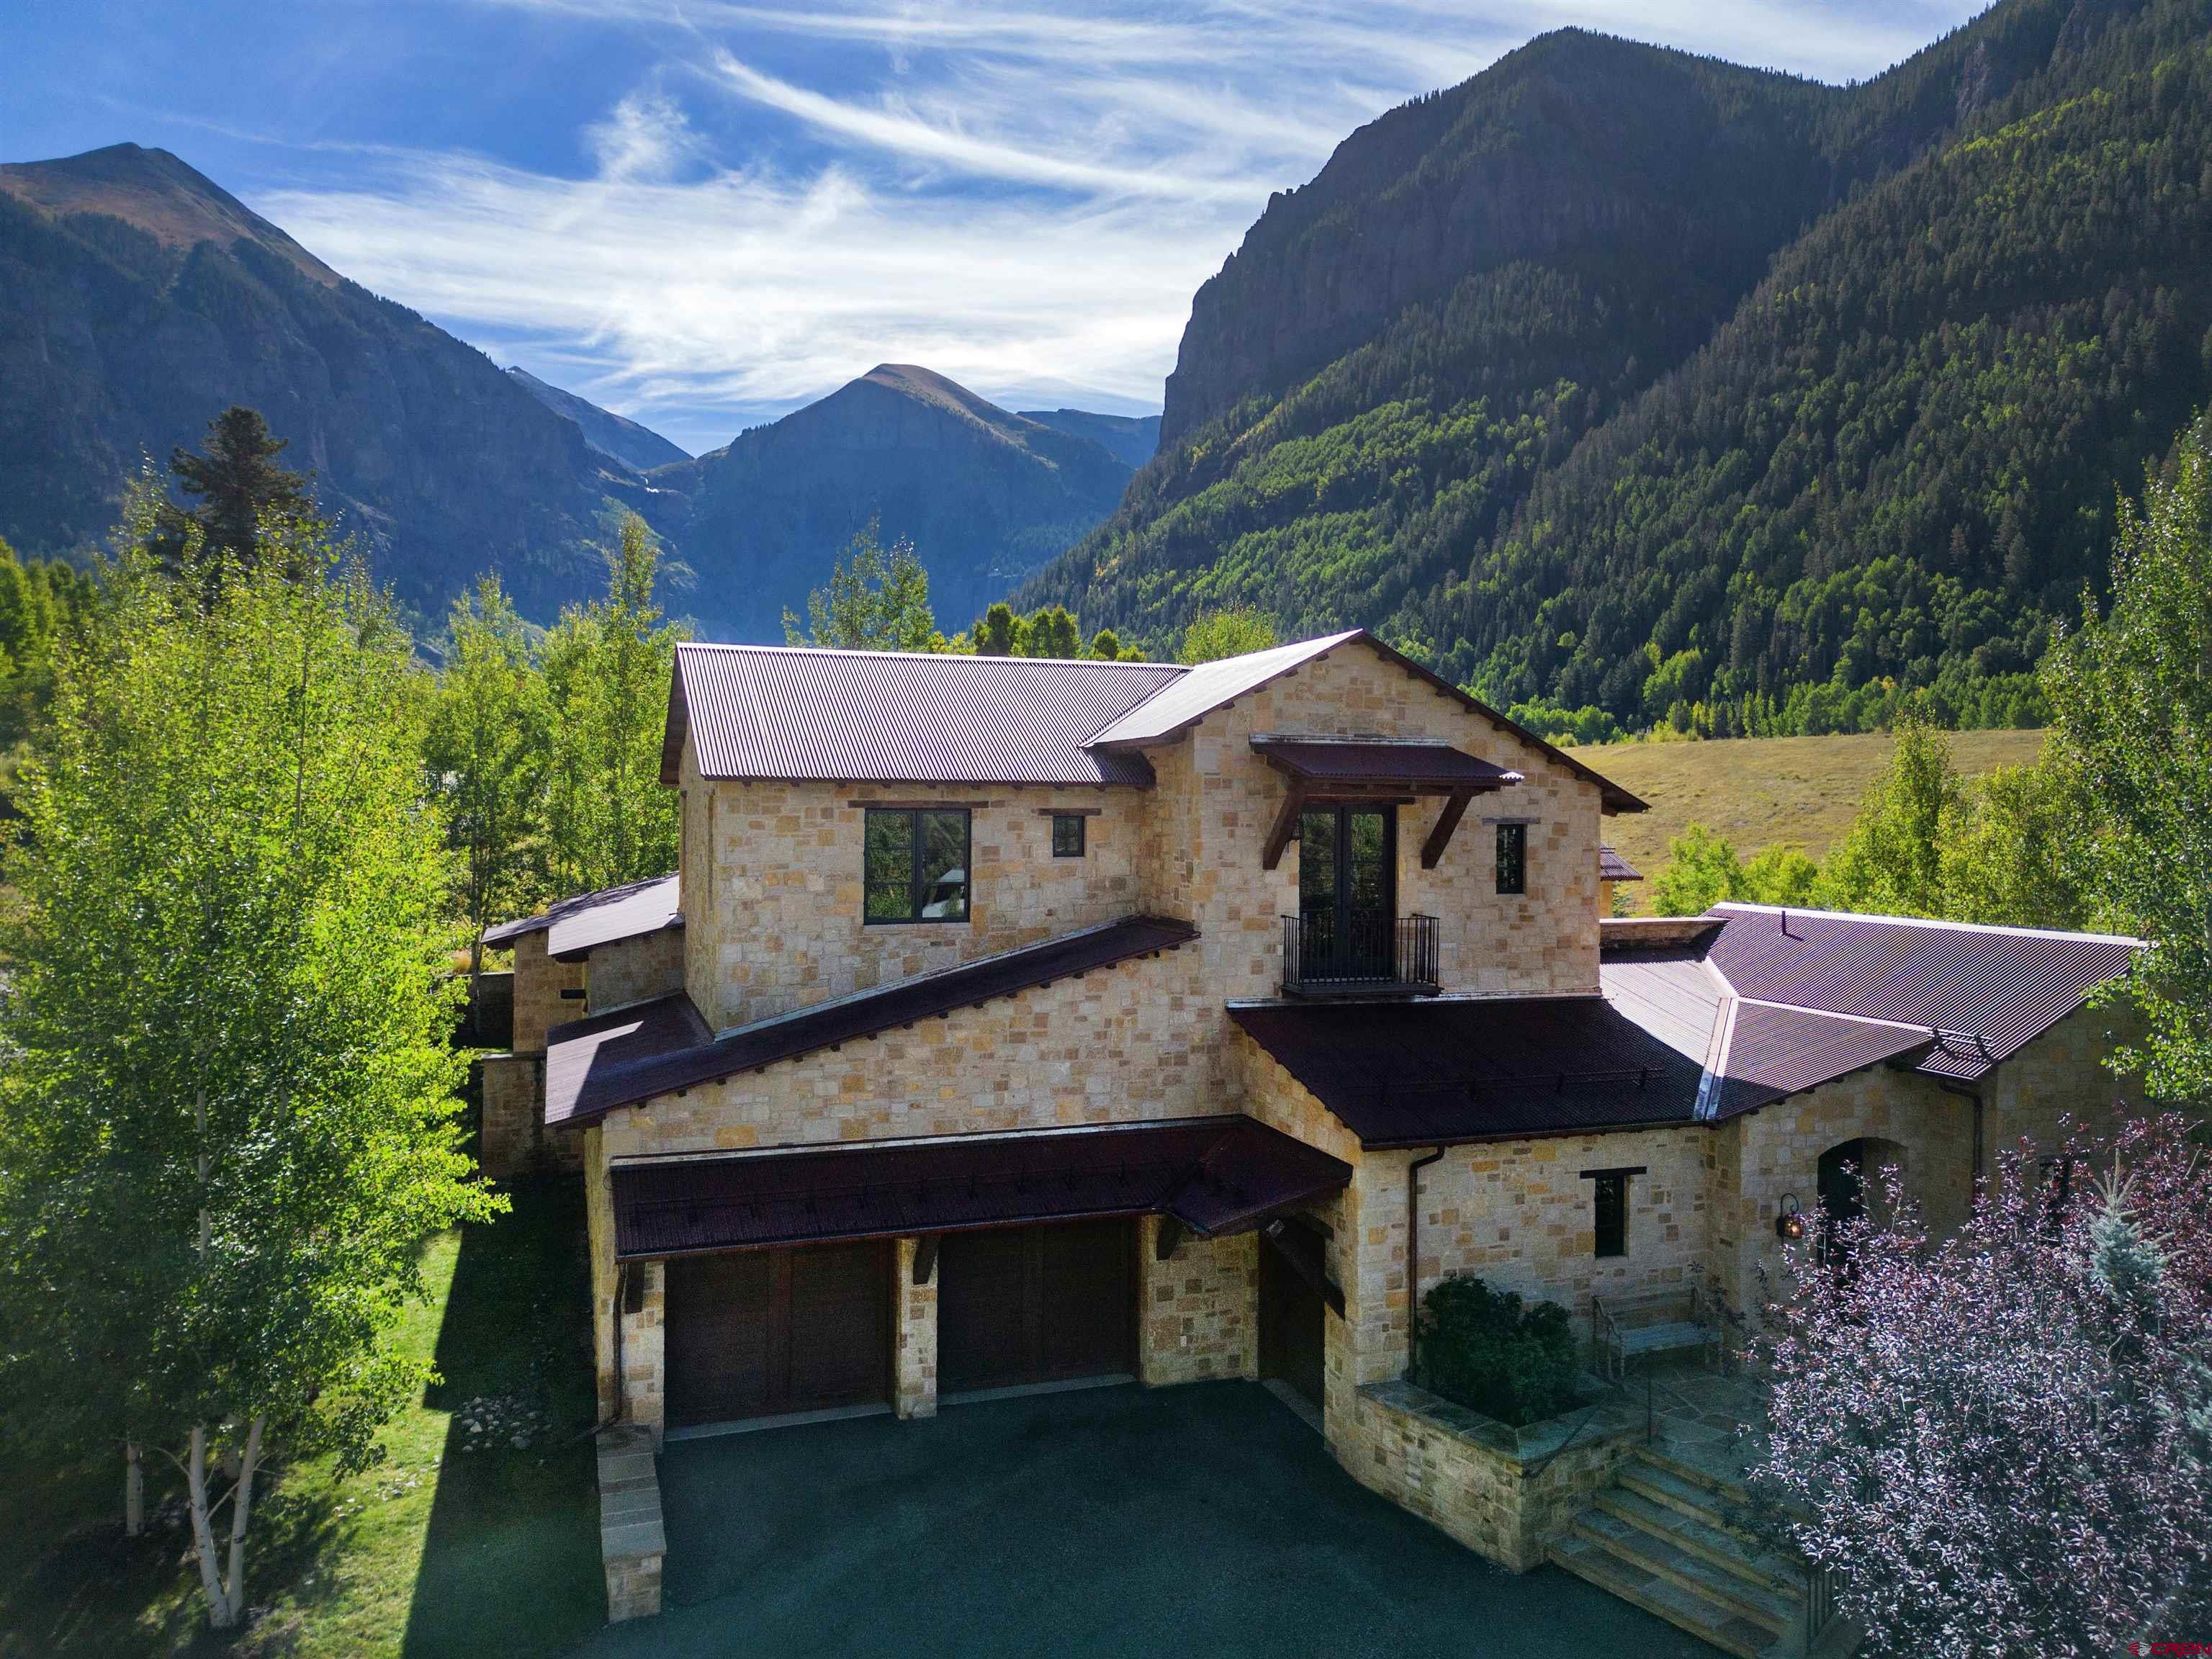 This stunning estate is located in the highly desirable Idarado Legacy neighborhood. It is perhaps the most beautiful of all mountain settings, just a short walk from downtown Telluride. The home's exquisite Spanish Colonial Revival architecture was developed by award winning Ryan Street Architects. The elegant hacienda's interior was designed by Rachel Mast Design and built by Telluride's deLuca Construction with the most meticulous attention to detail. The six private bedrooms, large common areas, decks and patios were thoughtfully created to accommodate festive gatherings, while showcasing sweeping views of Telluride's majestic mountains. With over 8,700 square feet, this beautiful home is available to host almost any occasion.